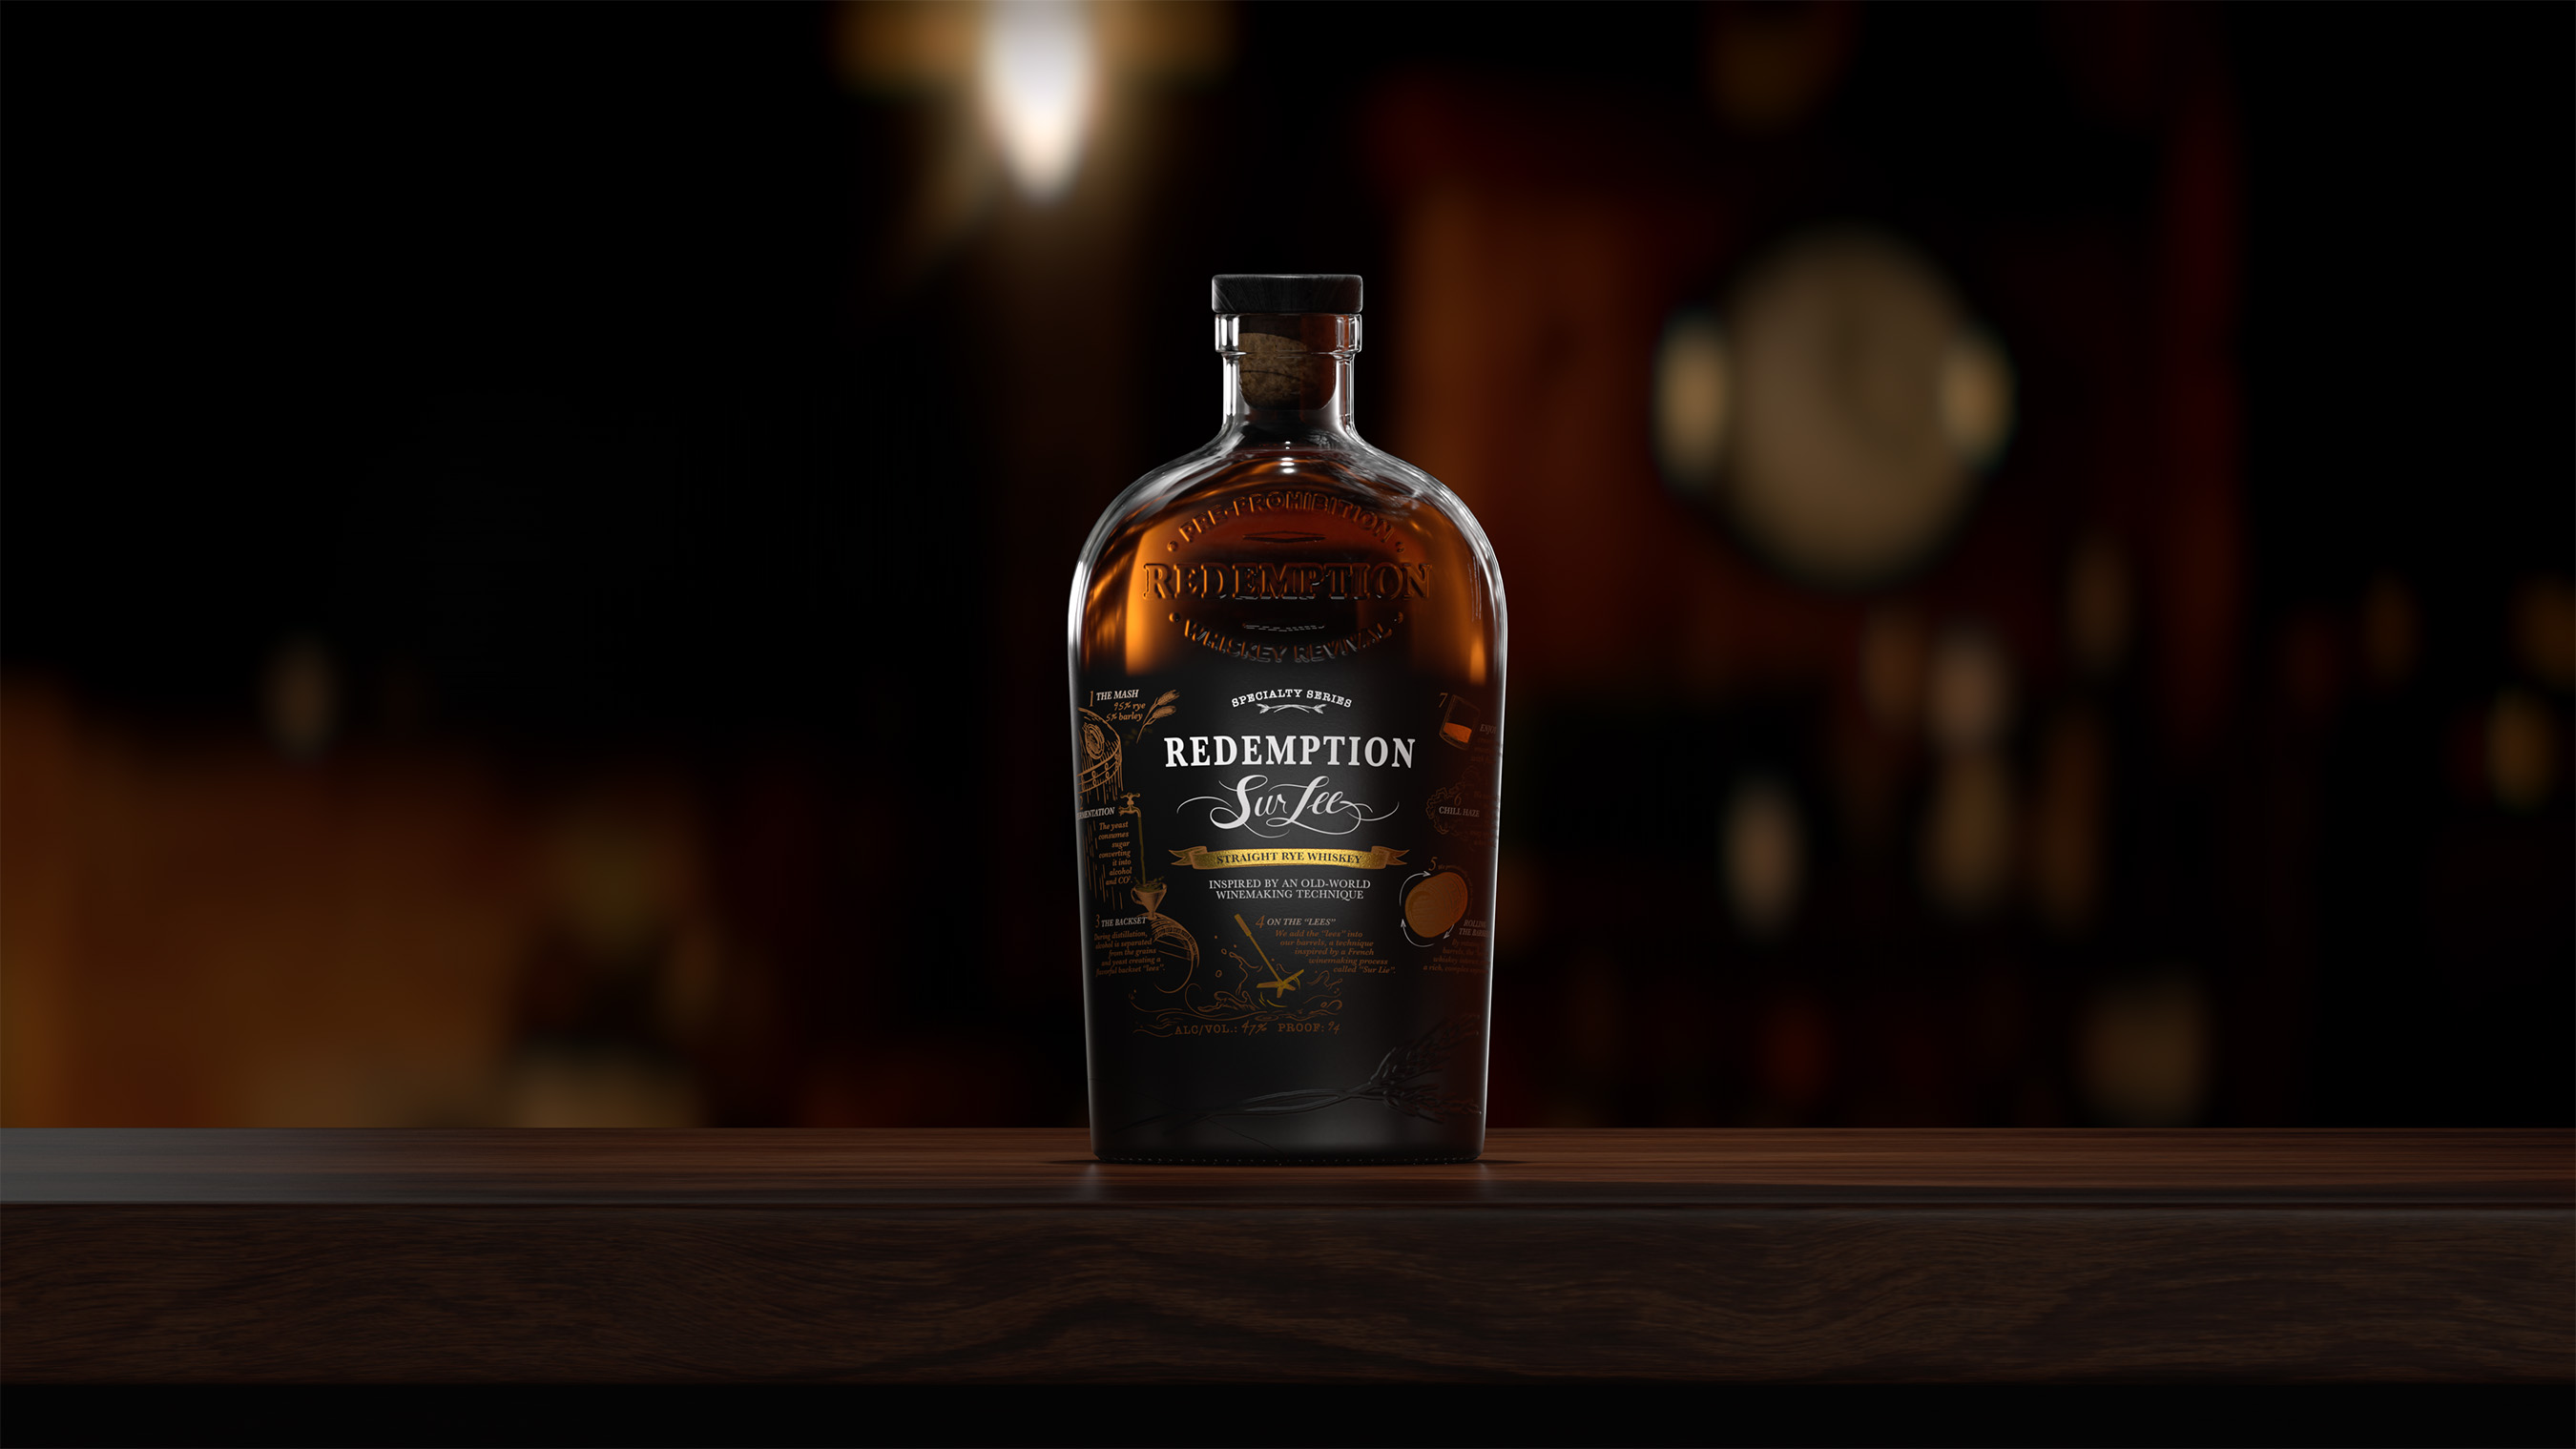 Introducing Redemption Sur Lee Straight Rye Whiskey. Credit: Redemption Whiskey